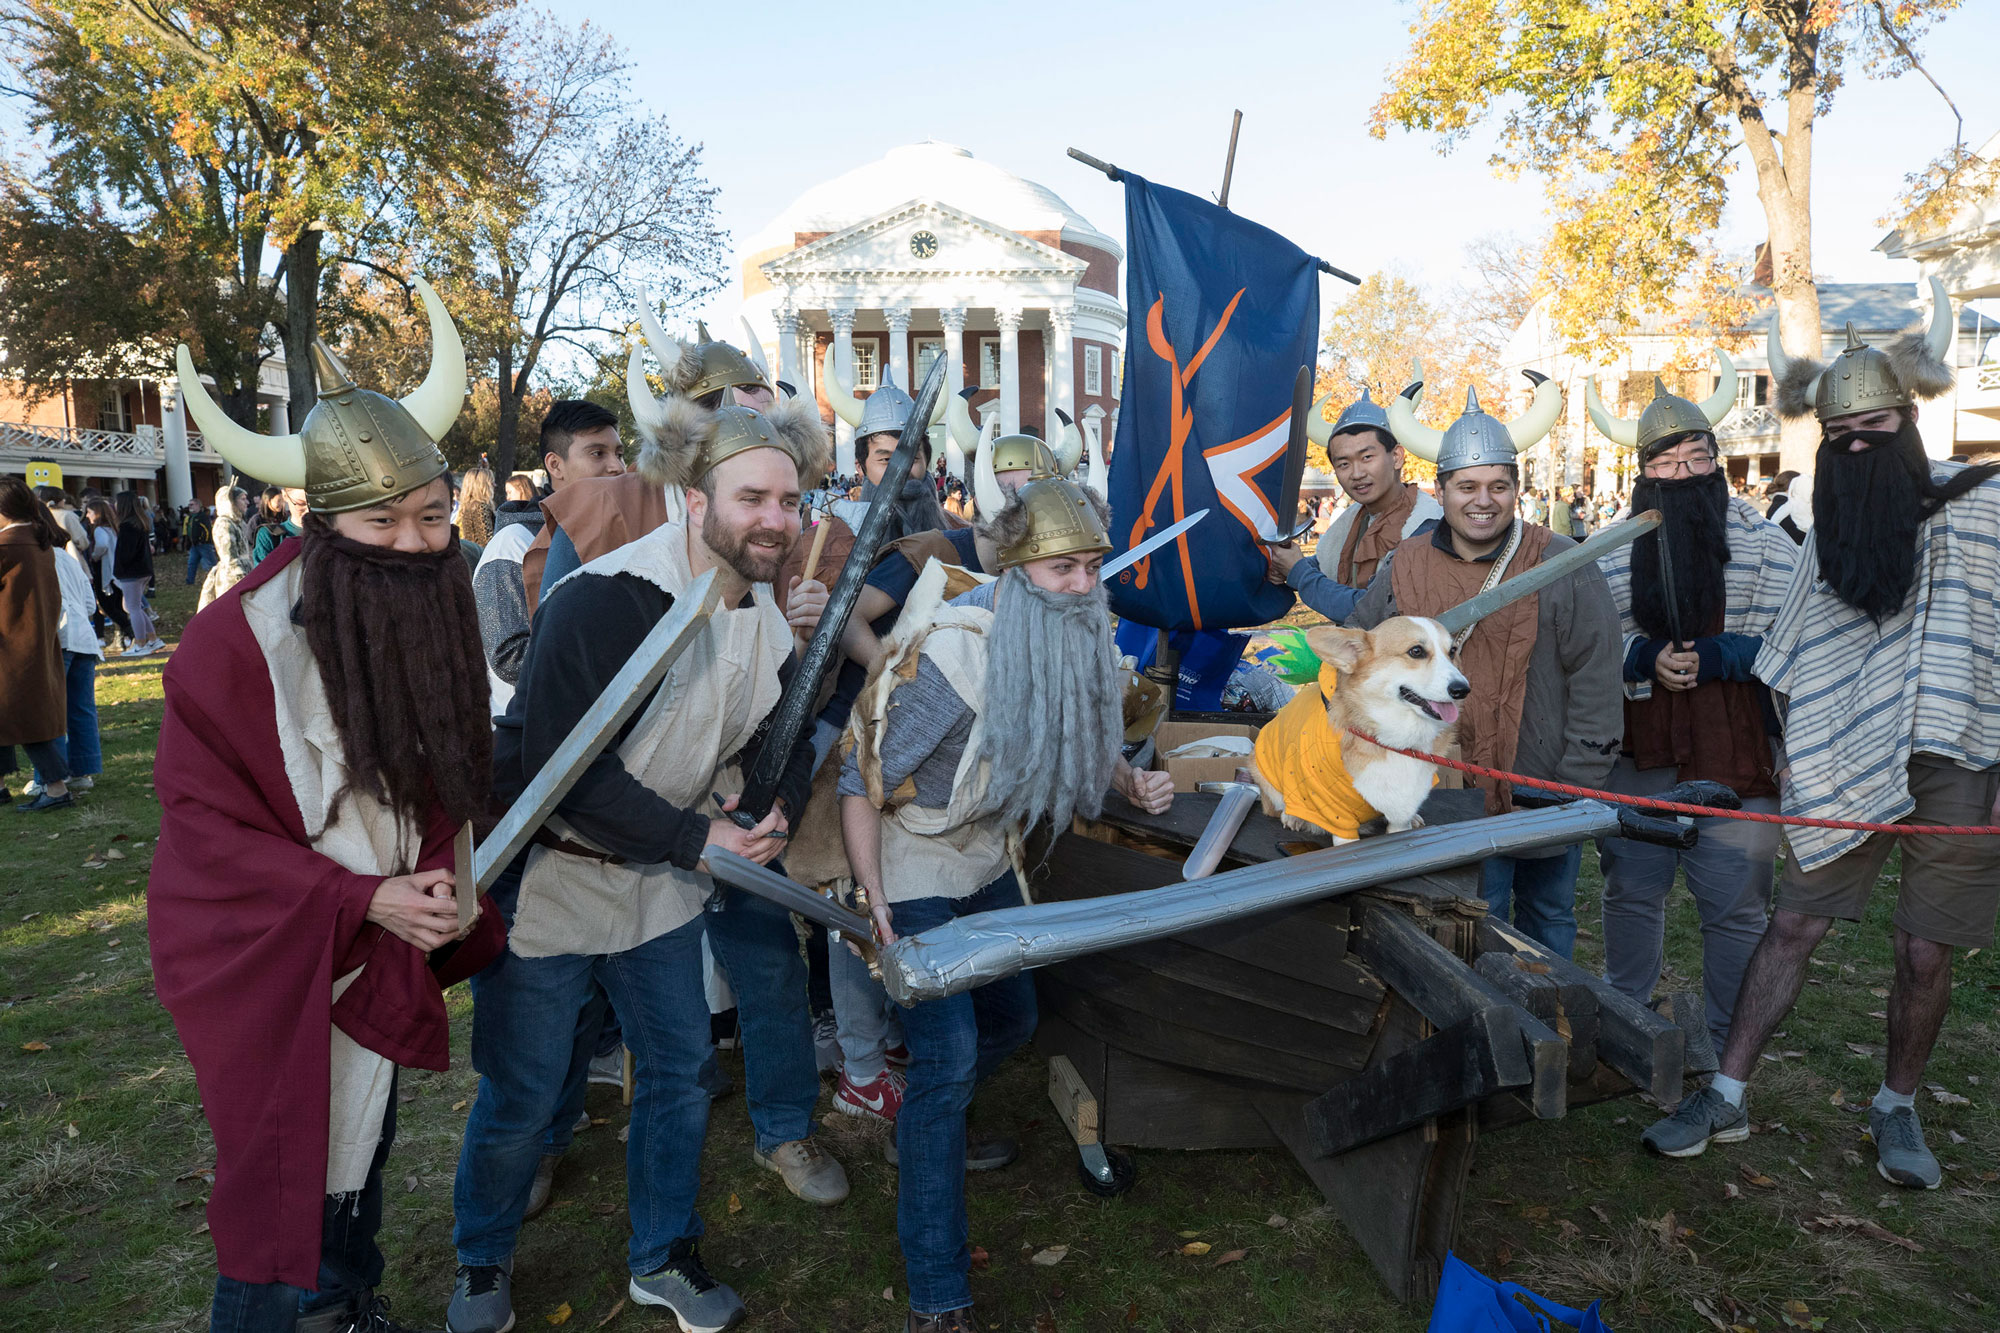 Students dressed up as vikings on the Lawn